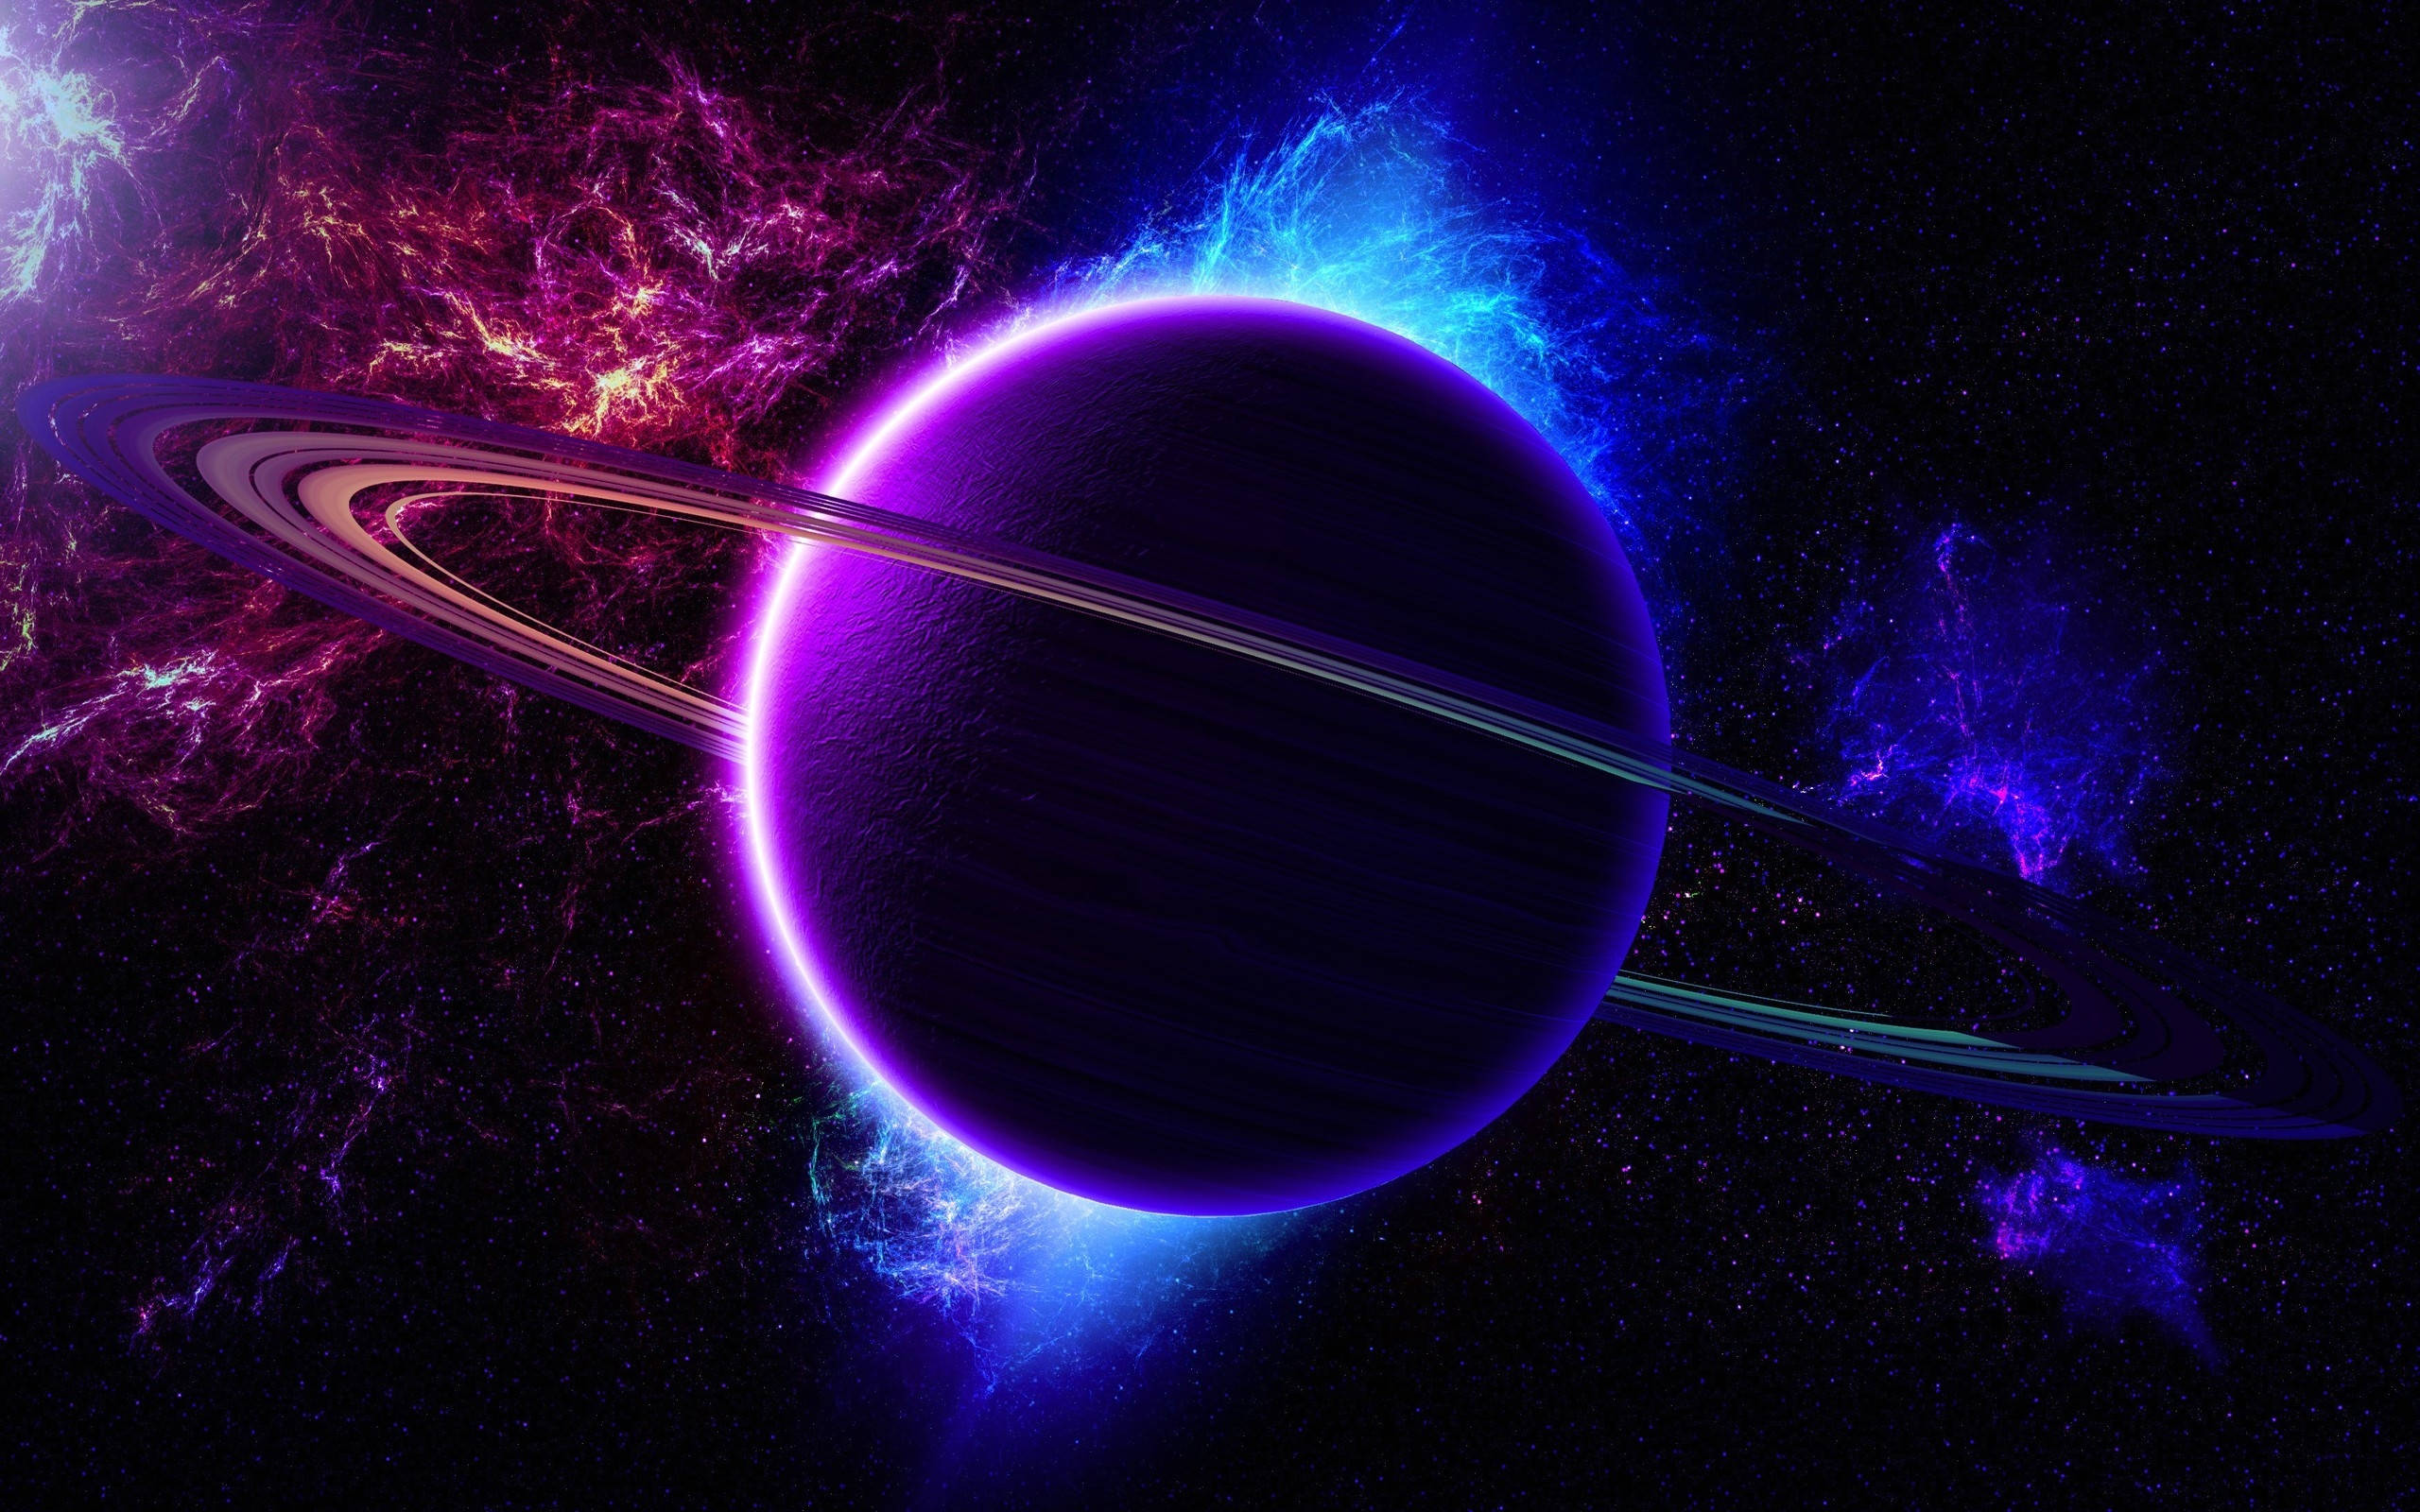 Saturn in Colorful Galaxy Wallpaper